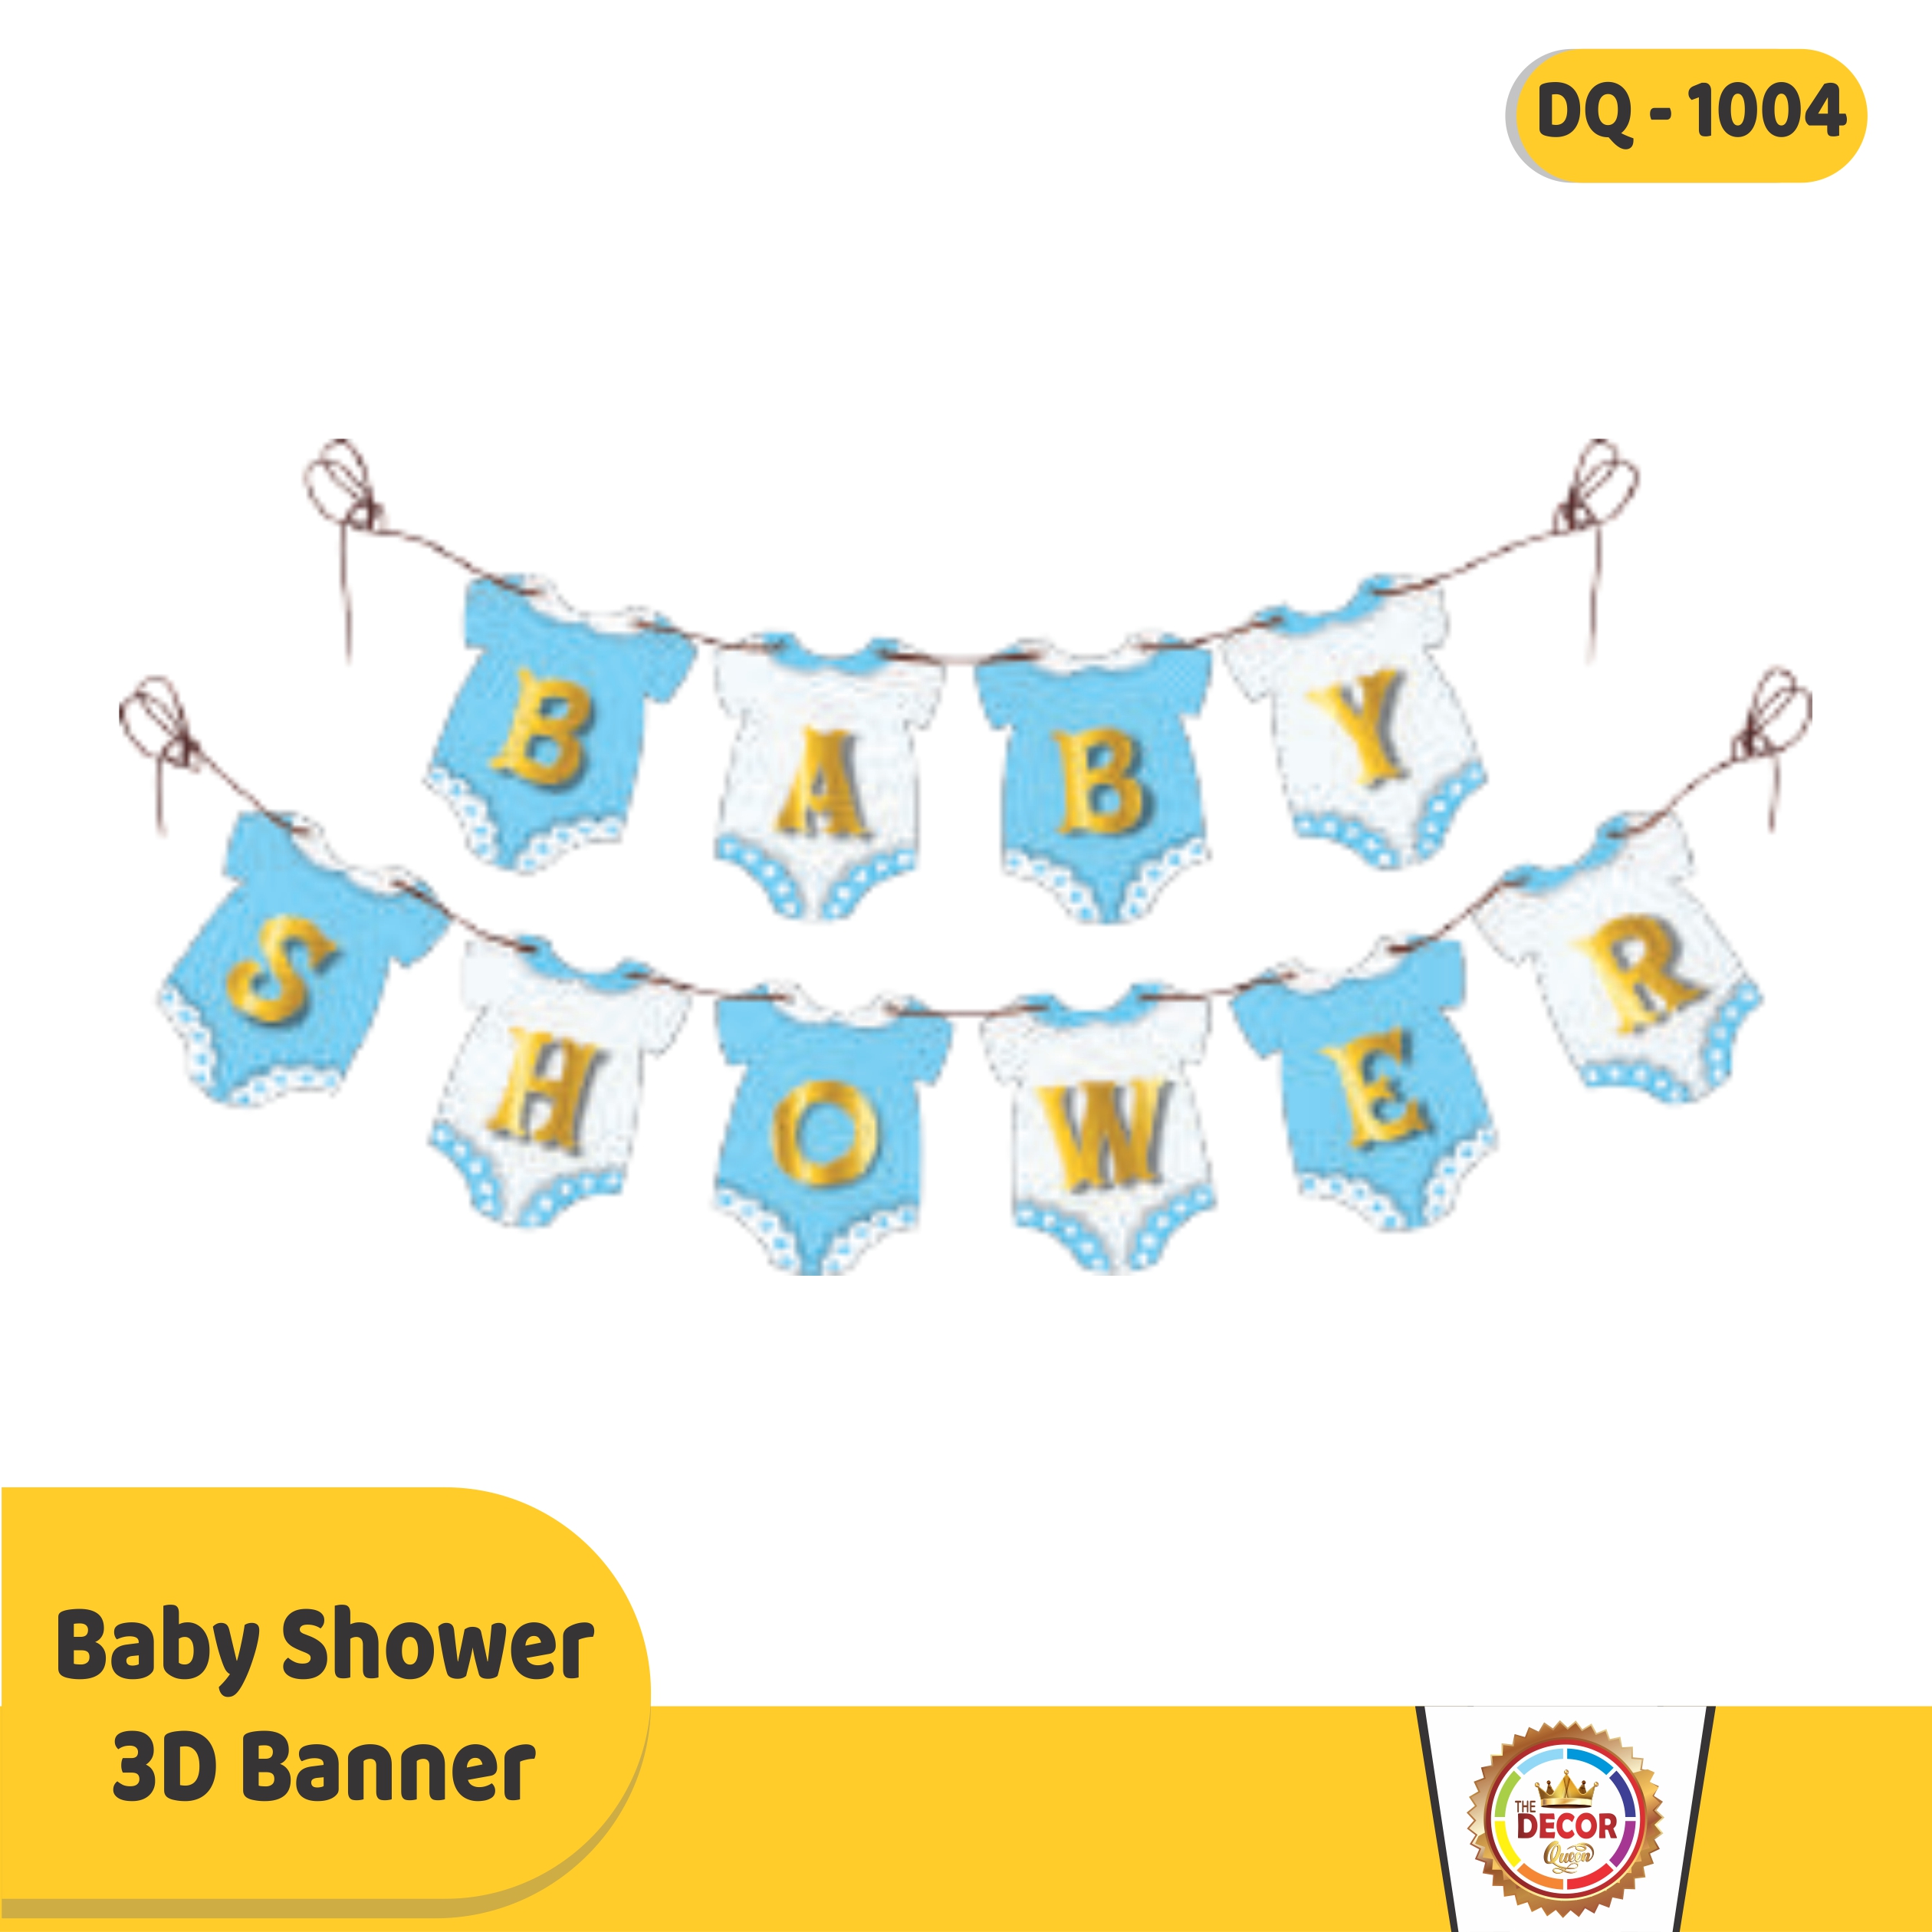 Baby Shower 3D Banner|Banners|Baby Shower Banner